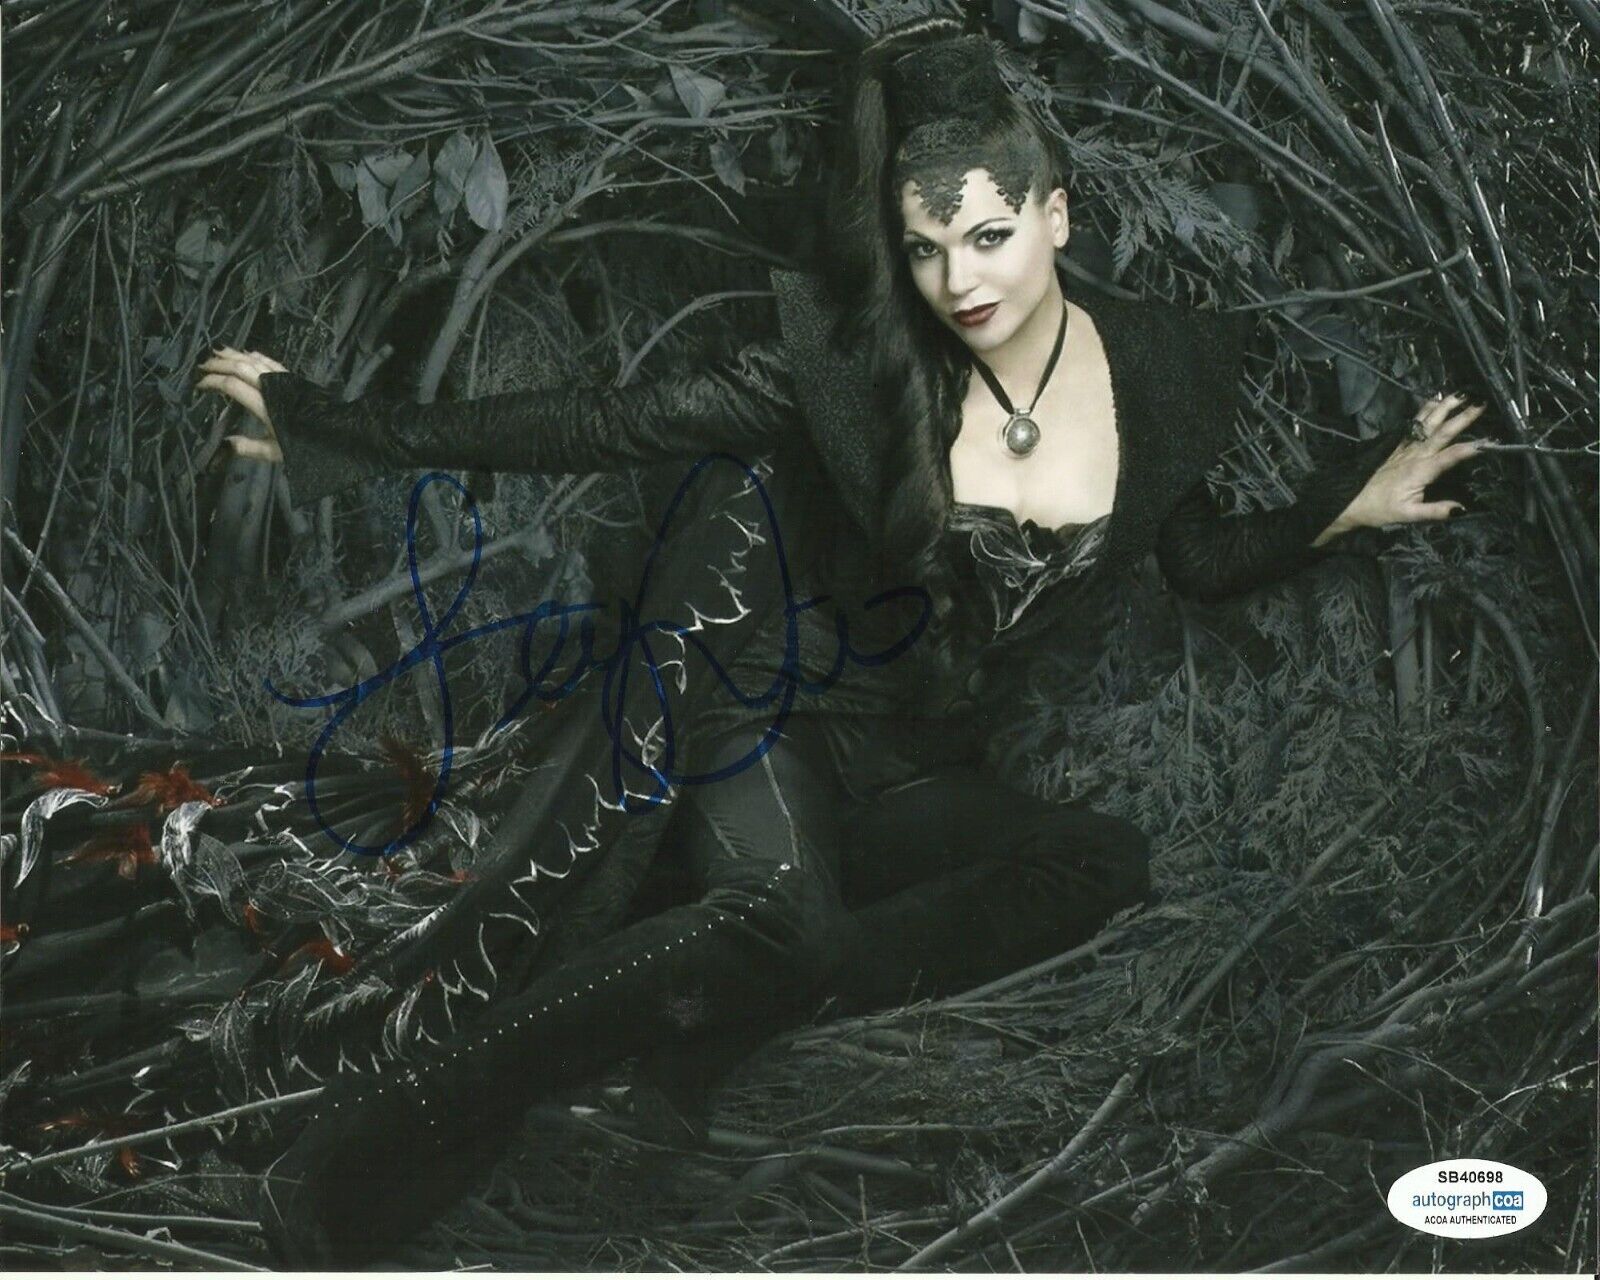 LANA PARRILLA SIGNED ONCE UPON A TIME PHOTO  (1) ACOA